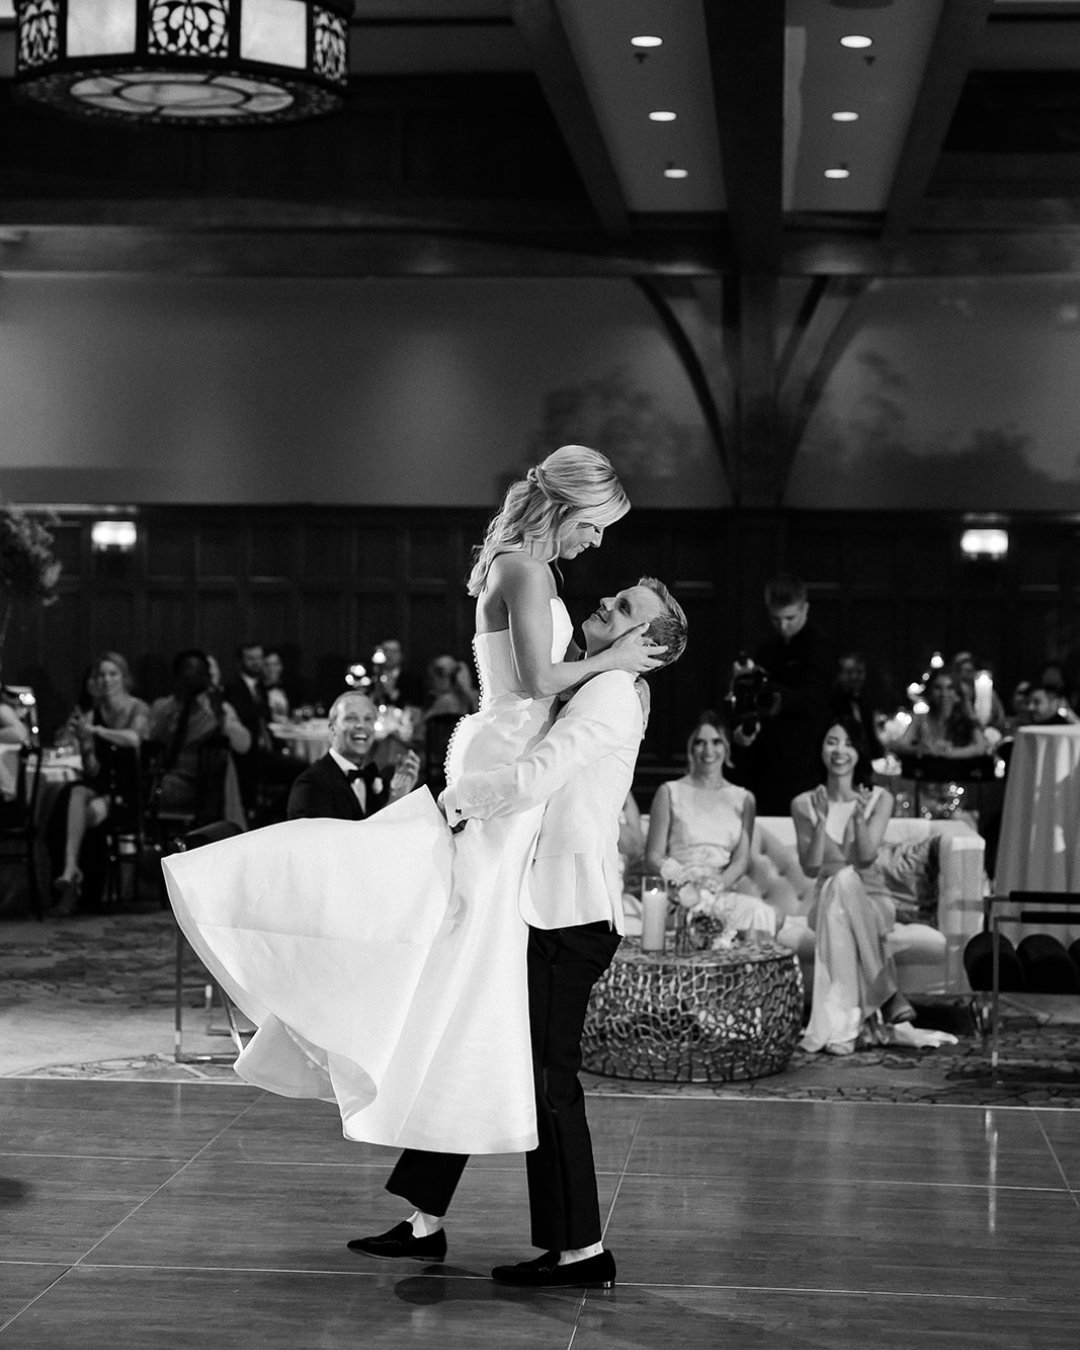 groom lifts his bride up by waist as they dance at their wedding reception